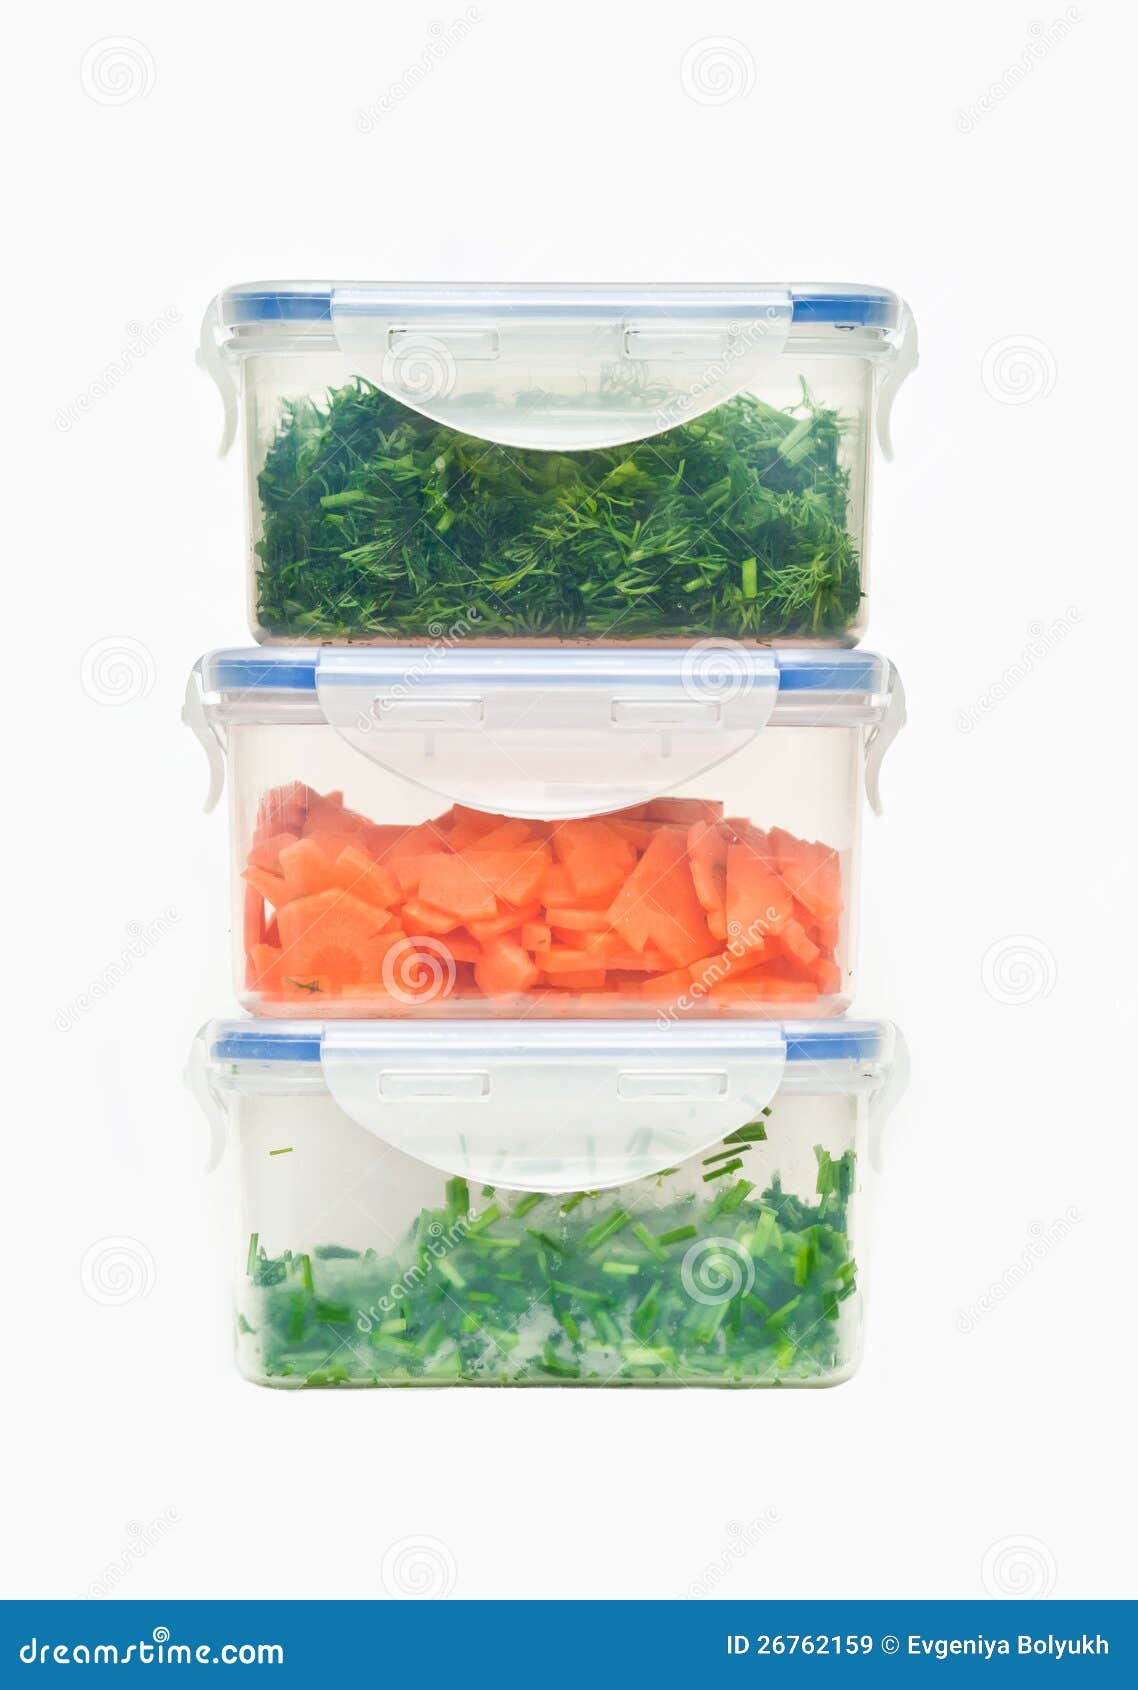 Food containers. Storage plastic containers with food isolated on white background